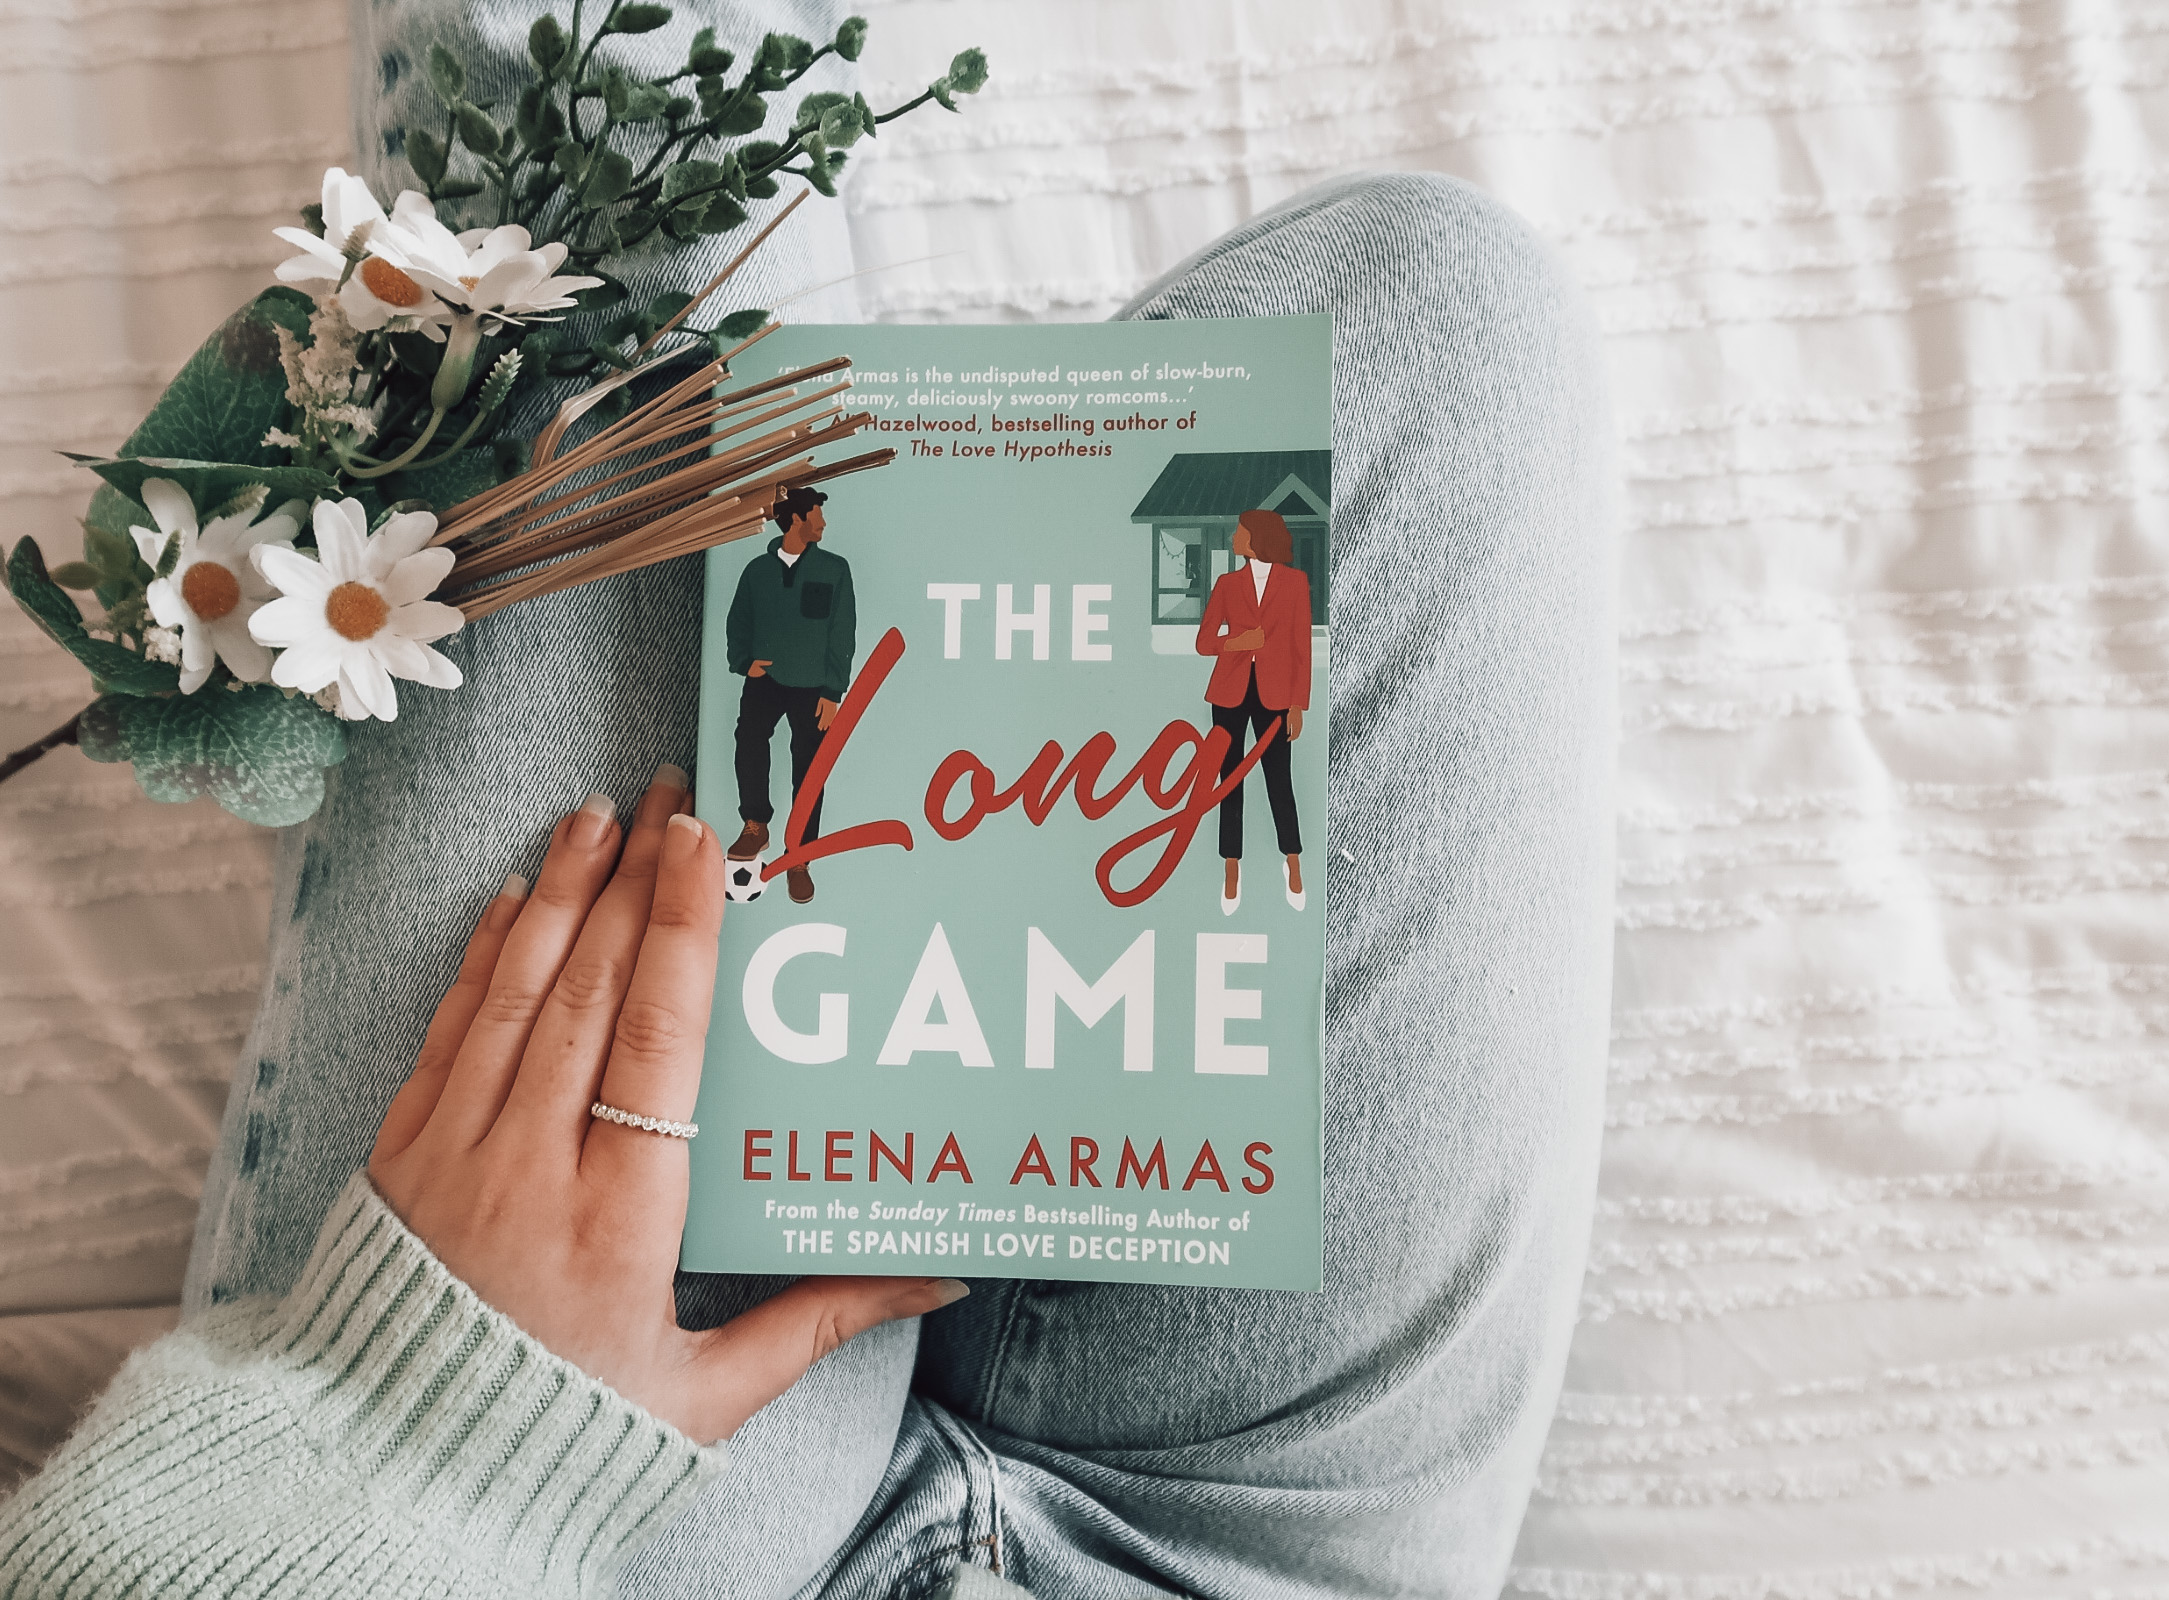 The Long Game by Elena Armas book.